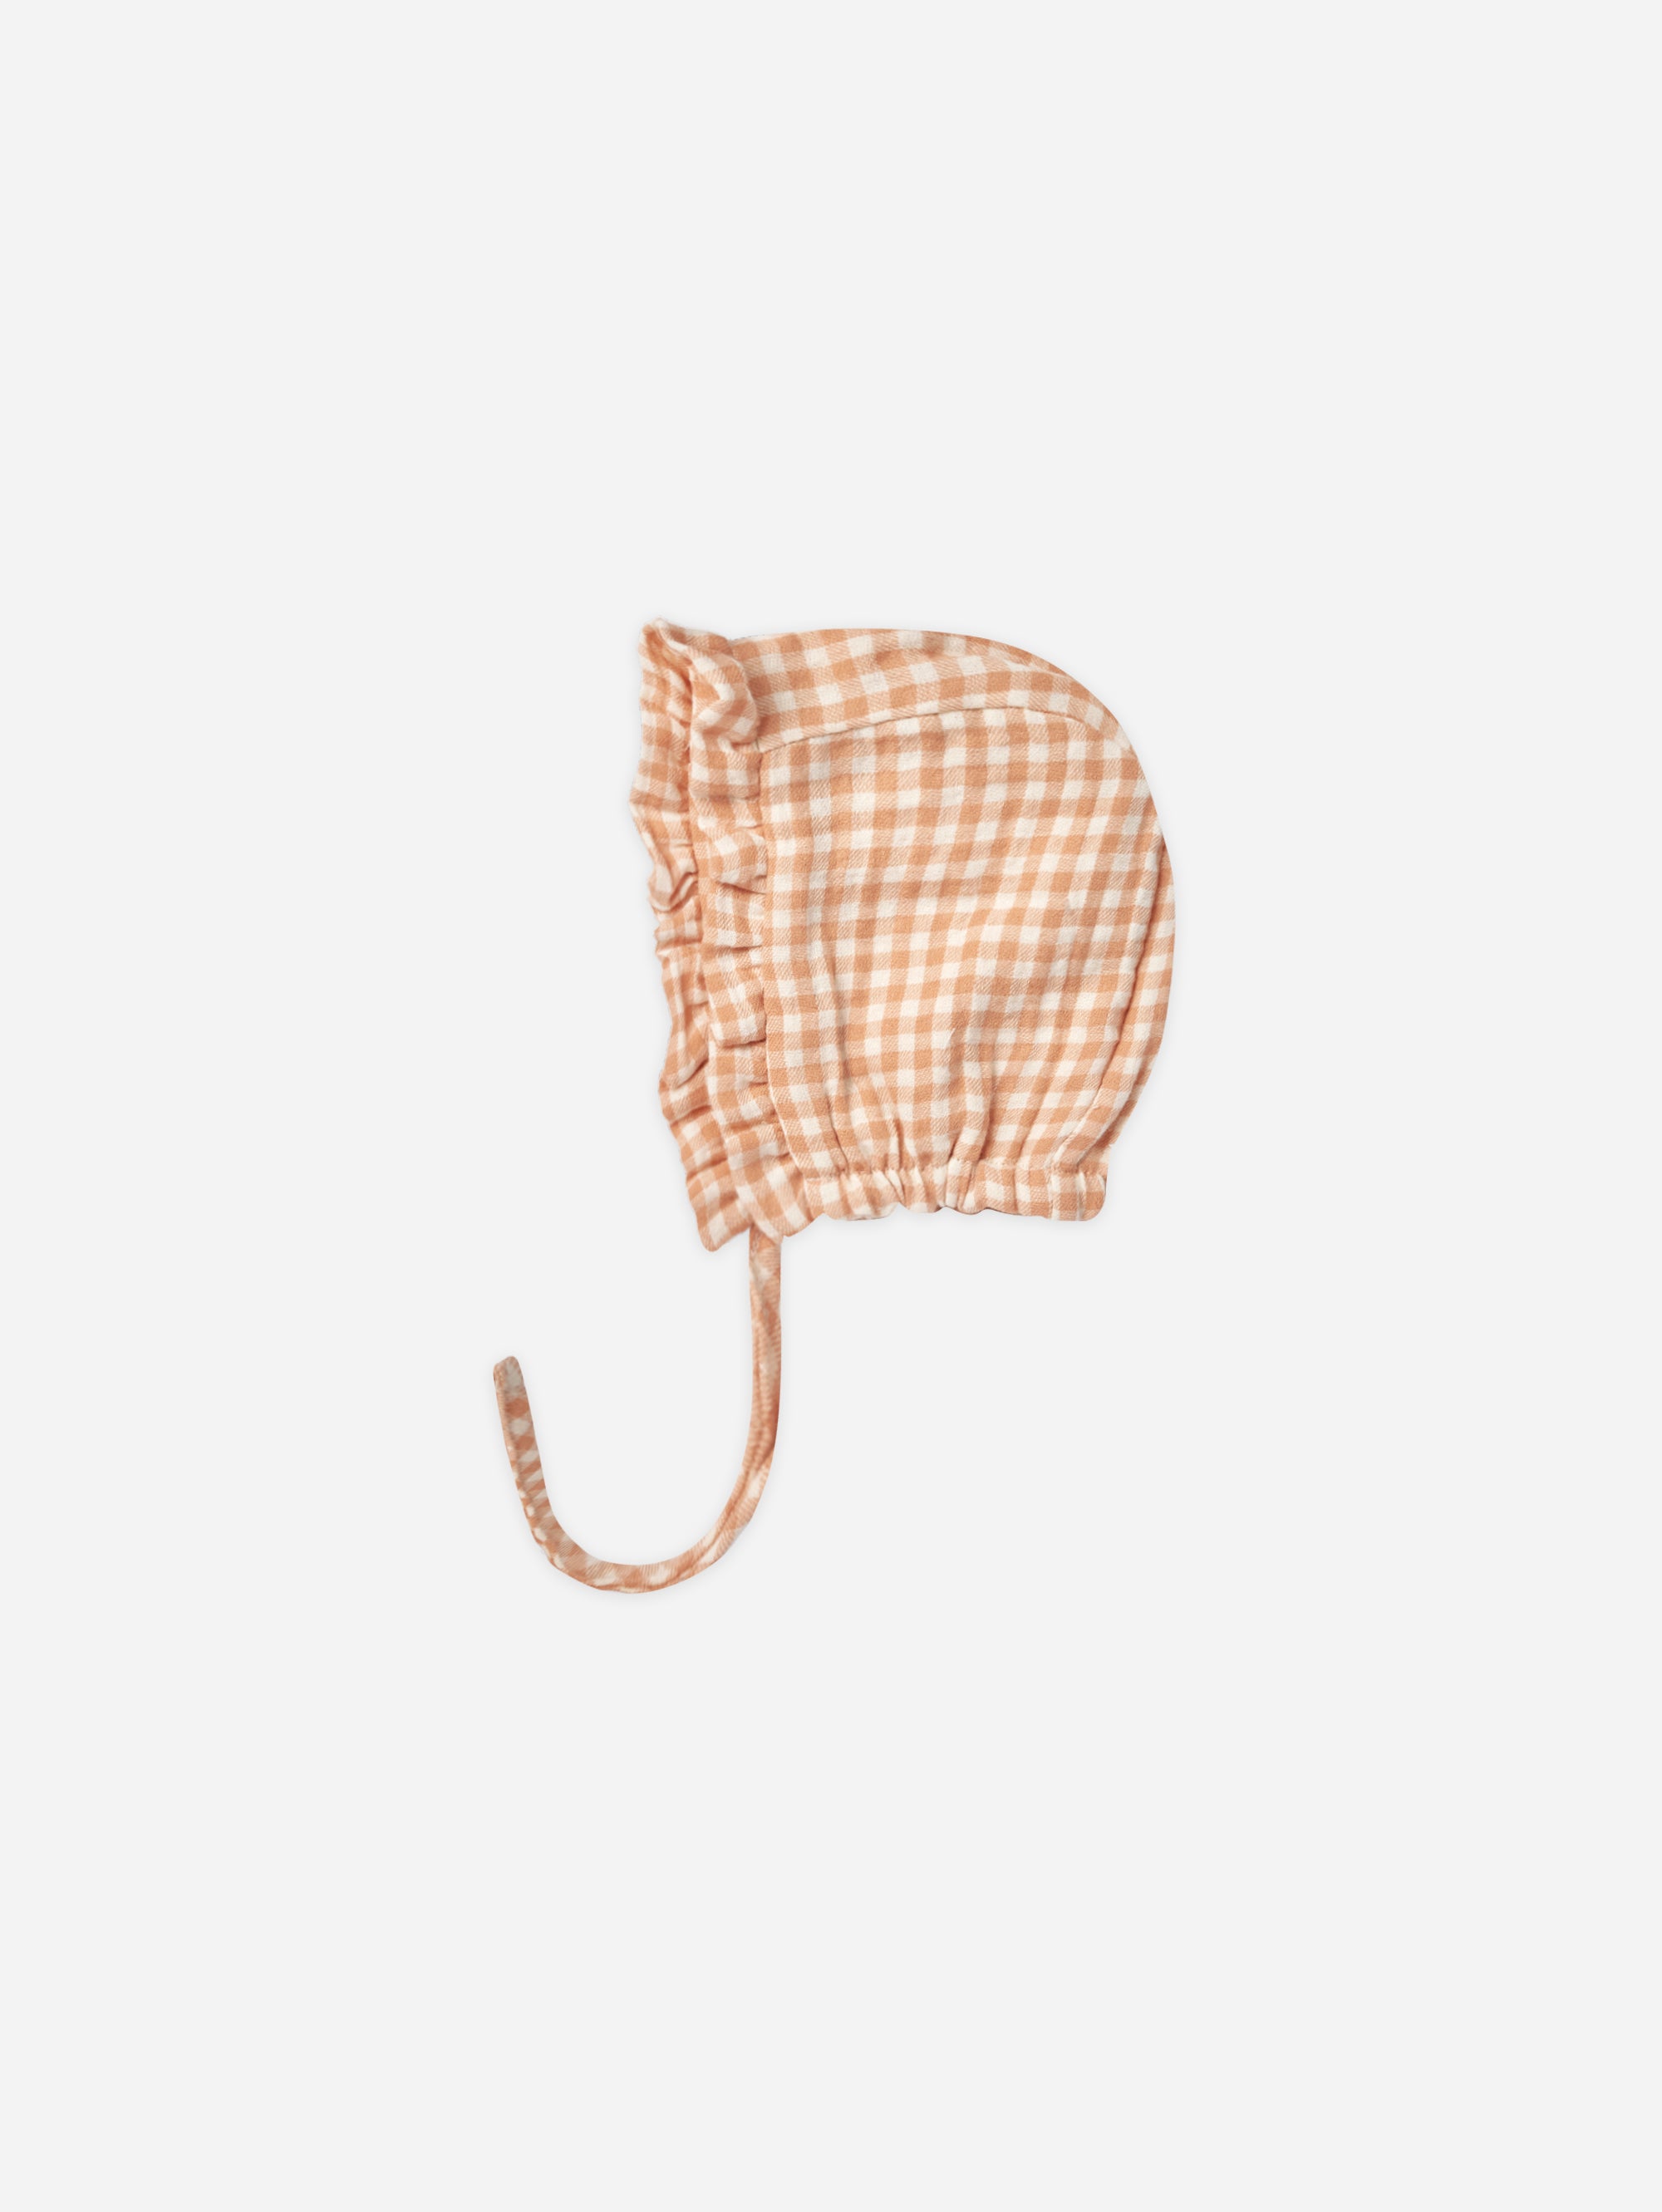 Woven Ruffle Bonnet || Melon Gingham - Rylee + Cru | Kids Clothes | Trendy Baby Clothes | Modern Infant Outfits |